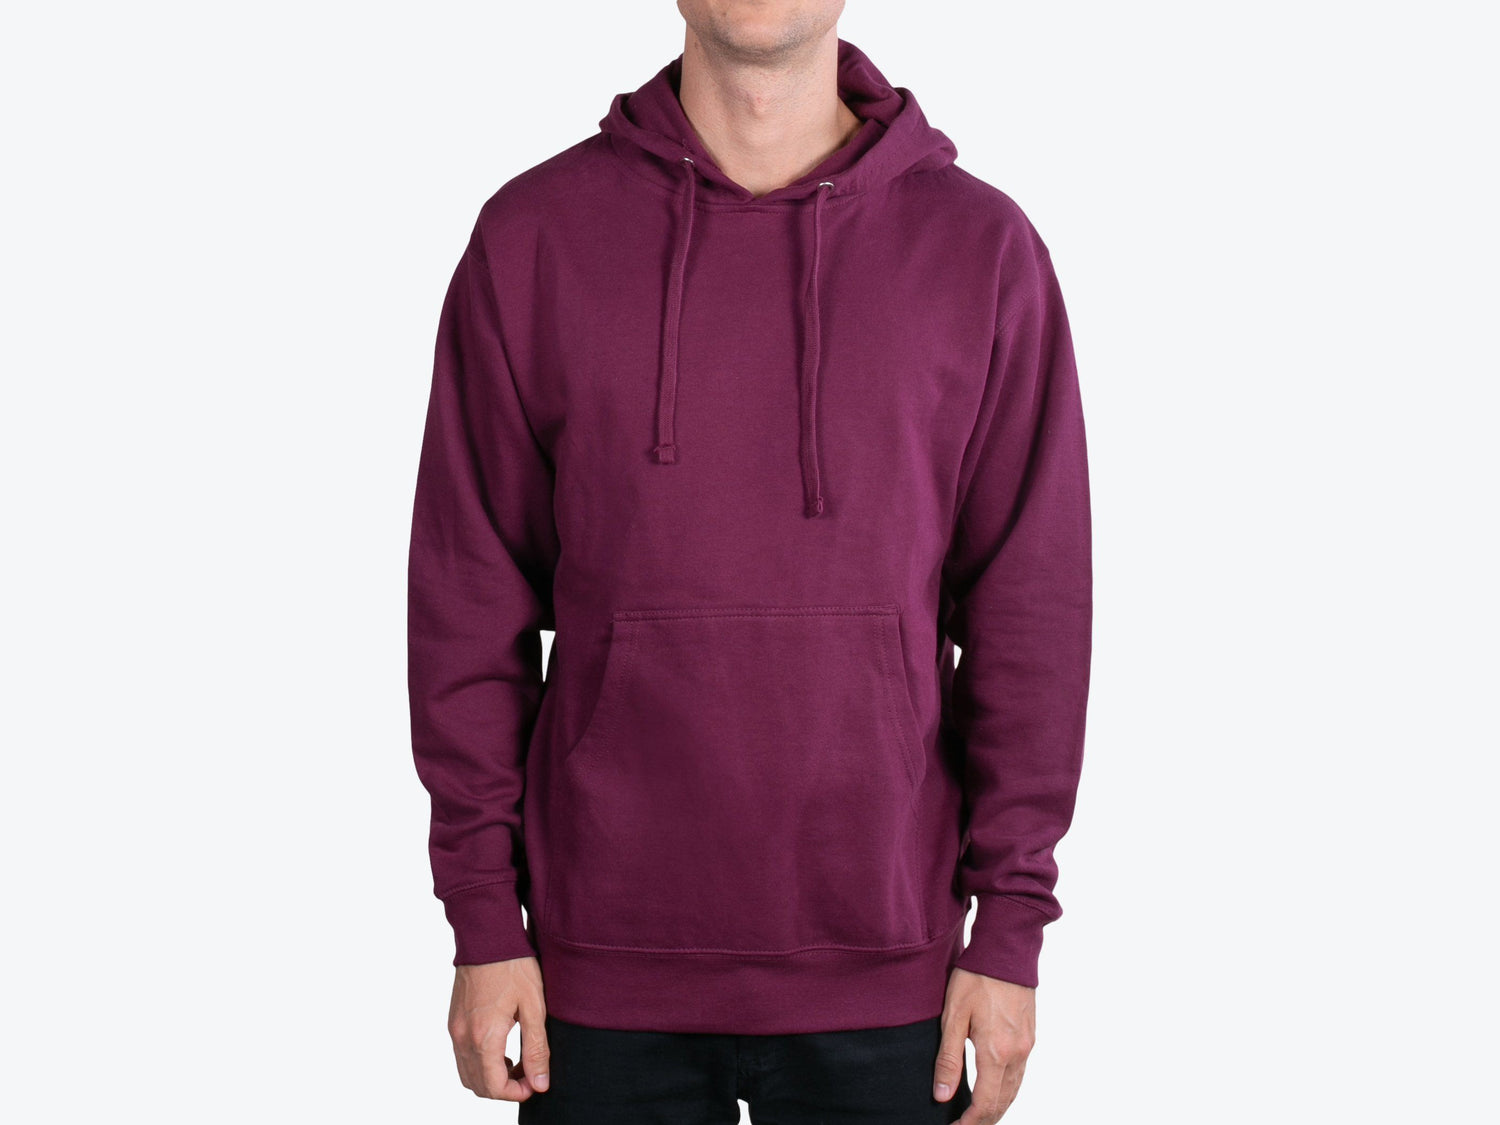 Independent Trading Co SS4500 Maroon Single Color 